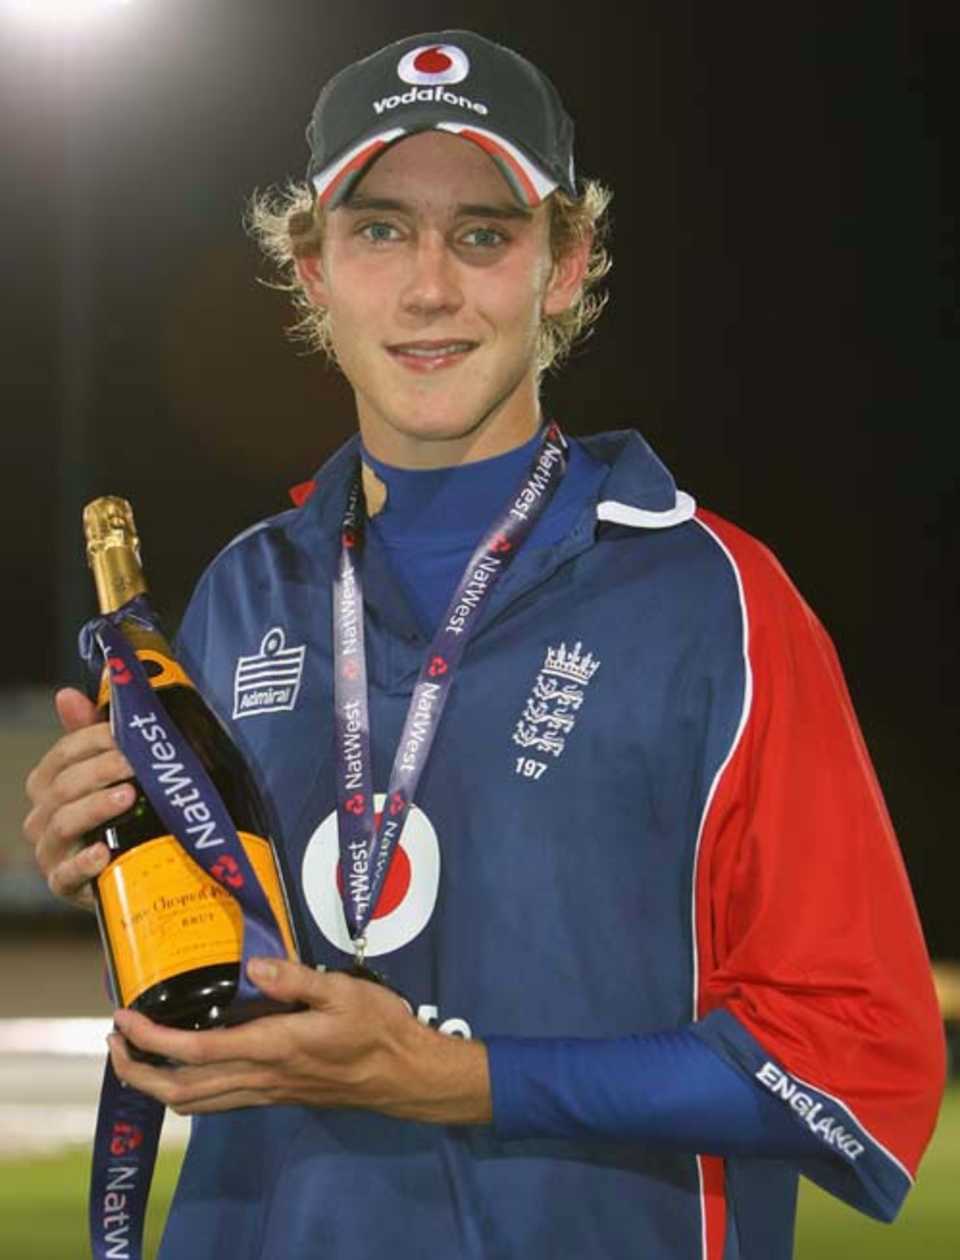 Man-of-the-Match Stuart Broad with the champagne, England v India, 4th ODI, Old Trafford, August 30, 2007